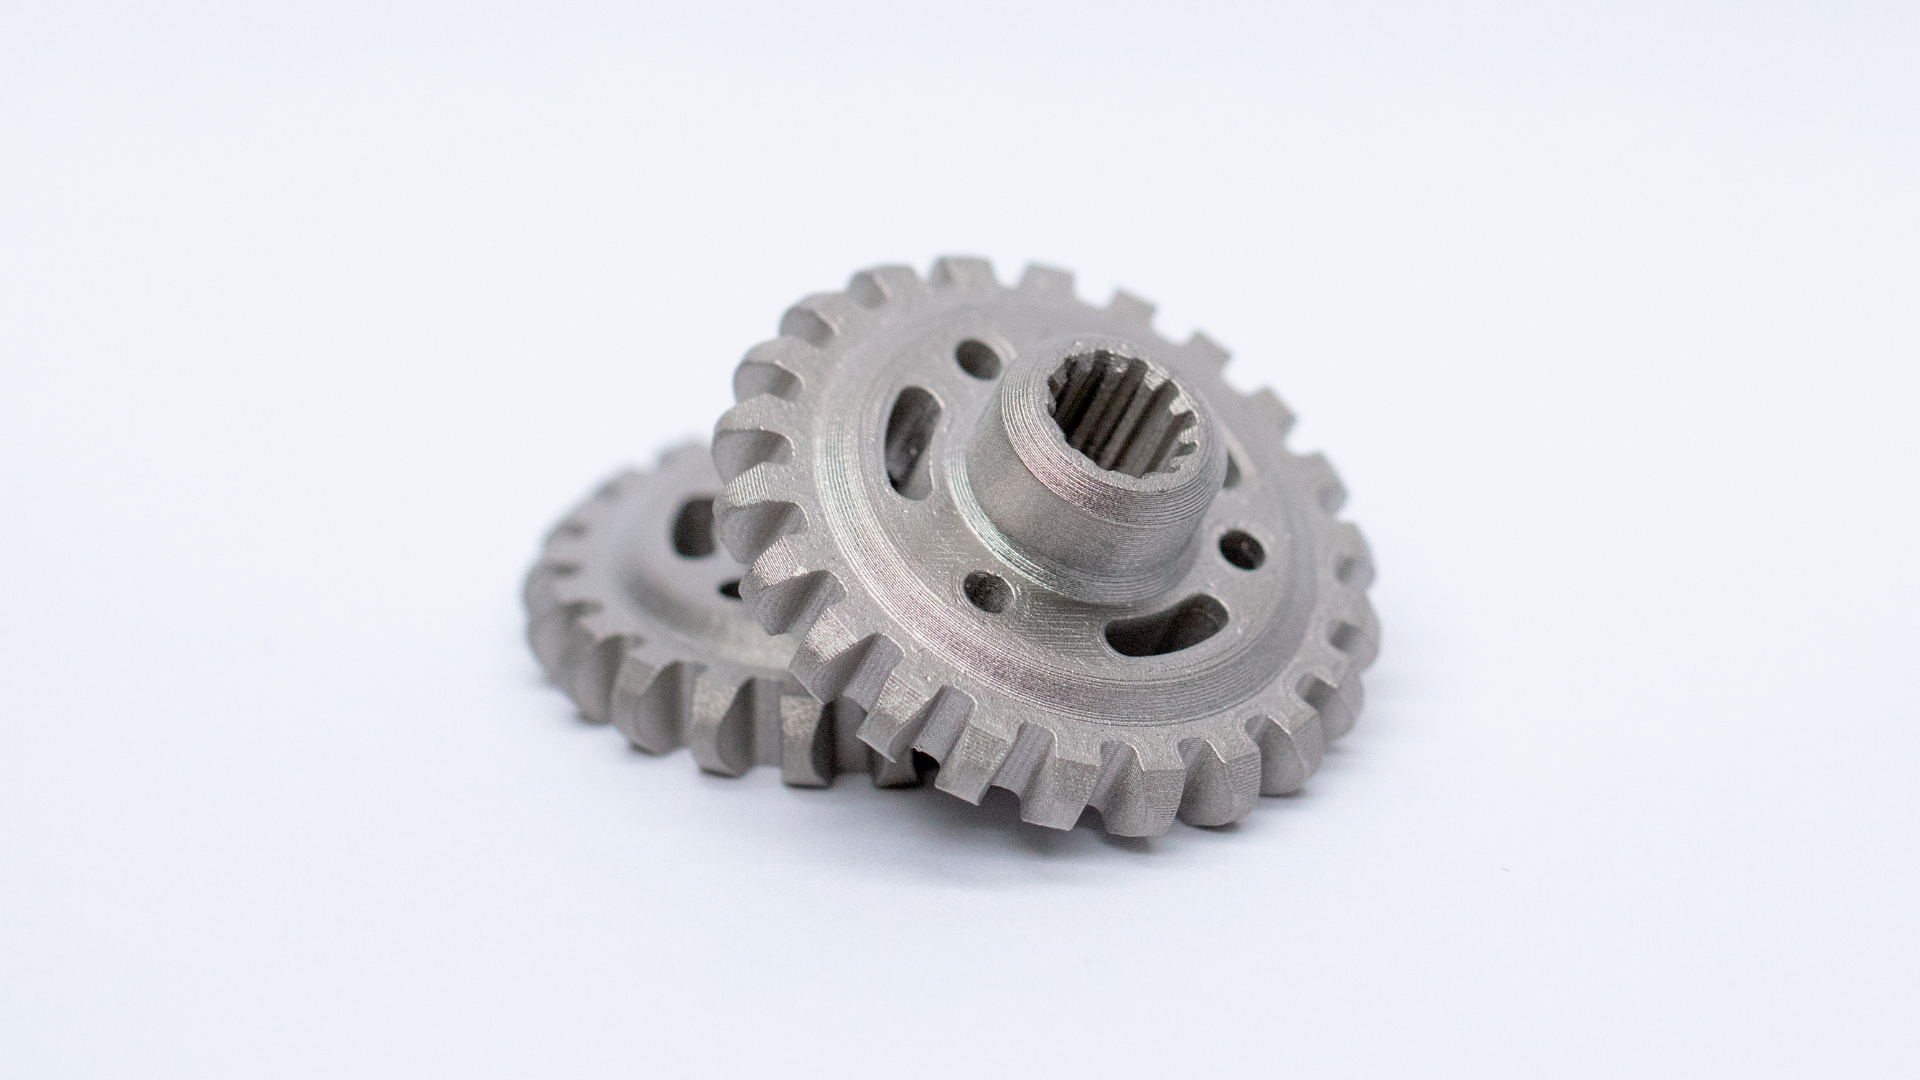 Desktop Metal has qualified the use of IN625 for the Studio System making a total of eight materials for their metal extrusion 3D printing system.